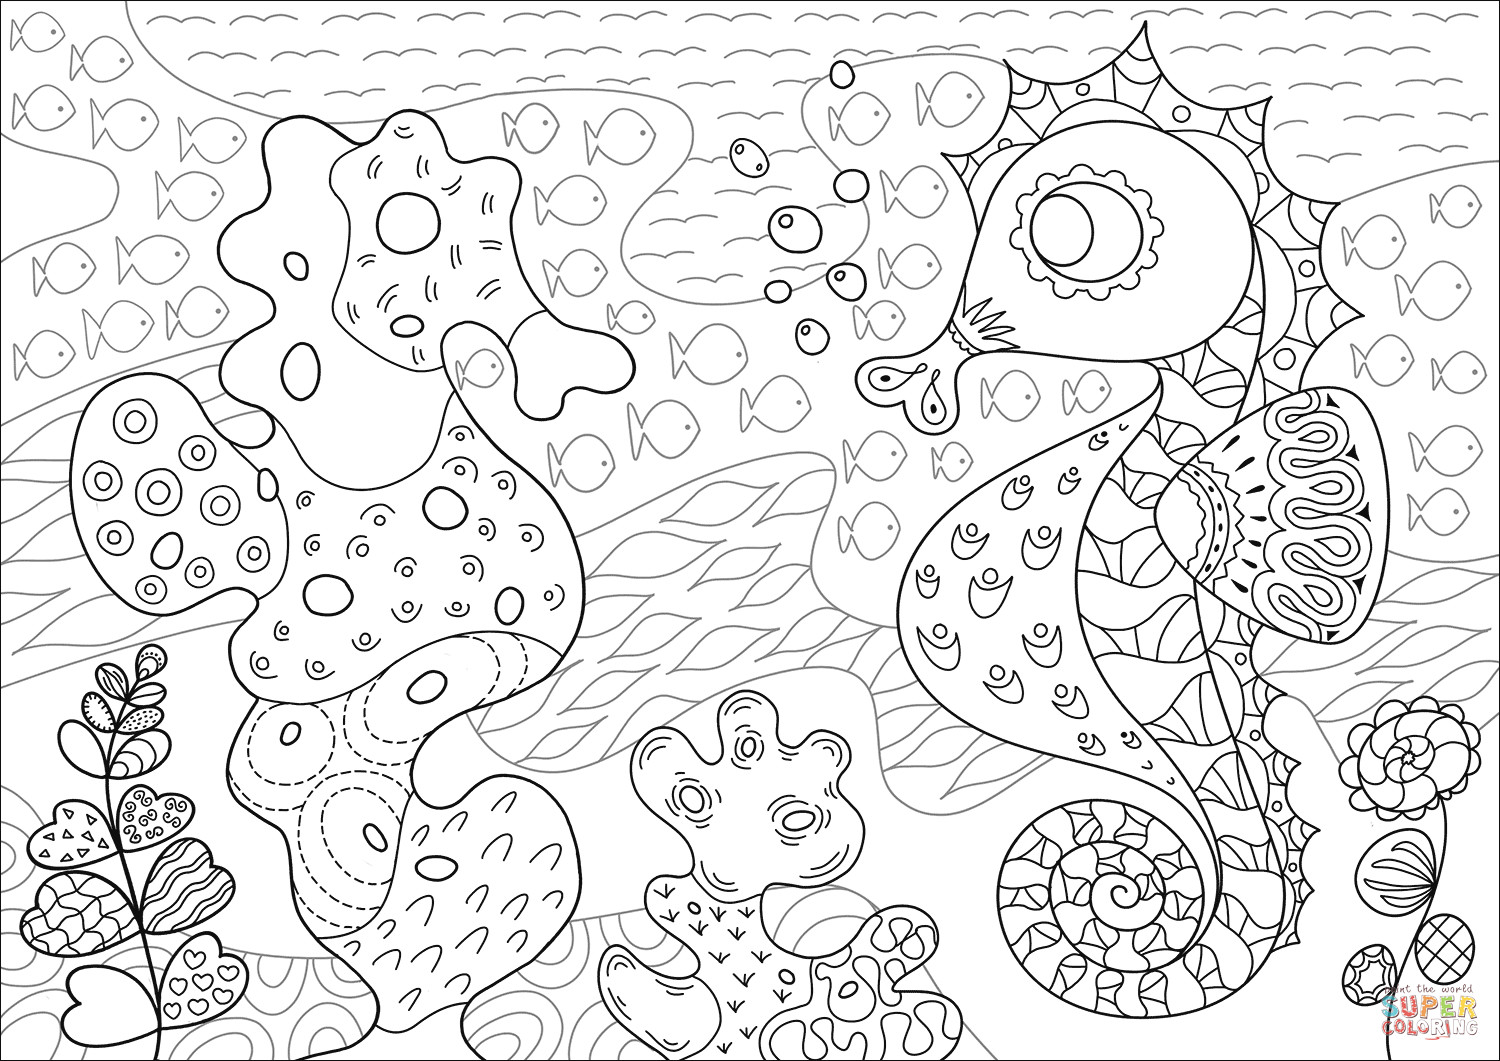 Coral Reef Coloring Pages
 Seahorse and Its Coral Reef Imitator coloring page